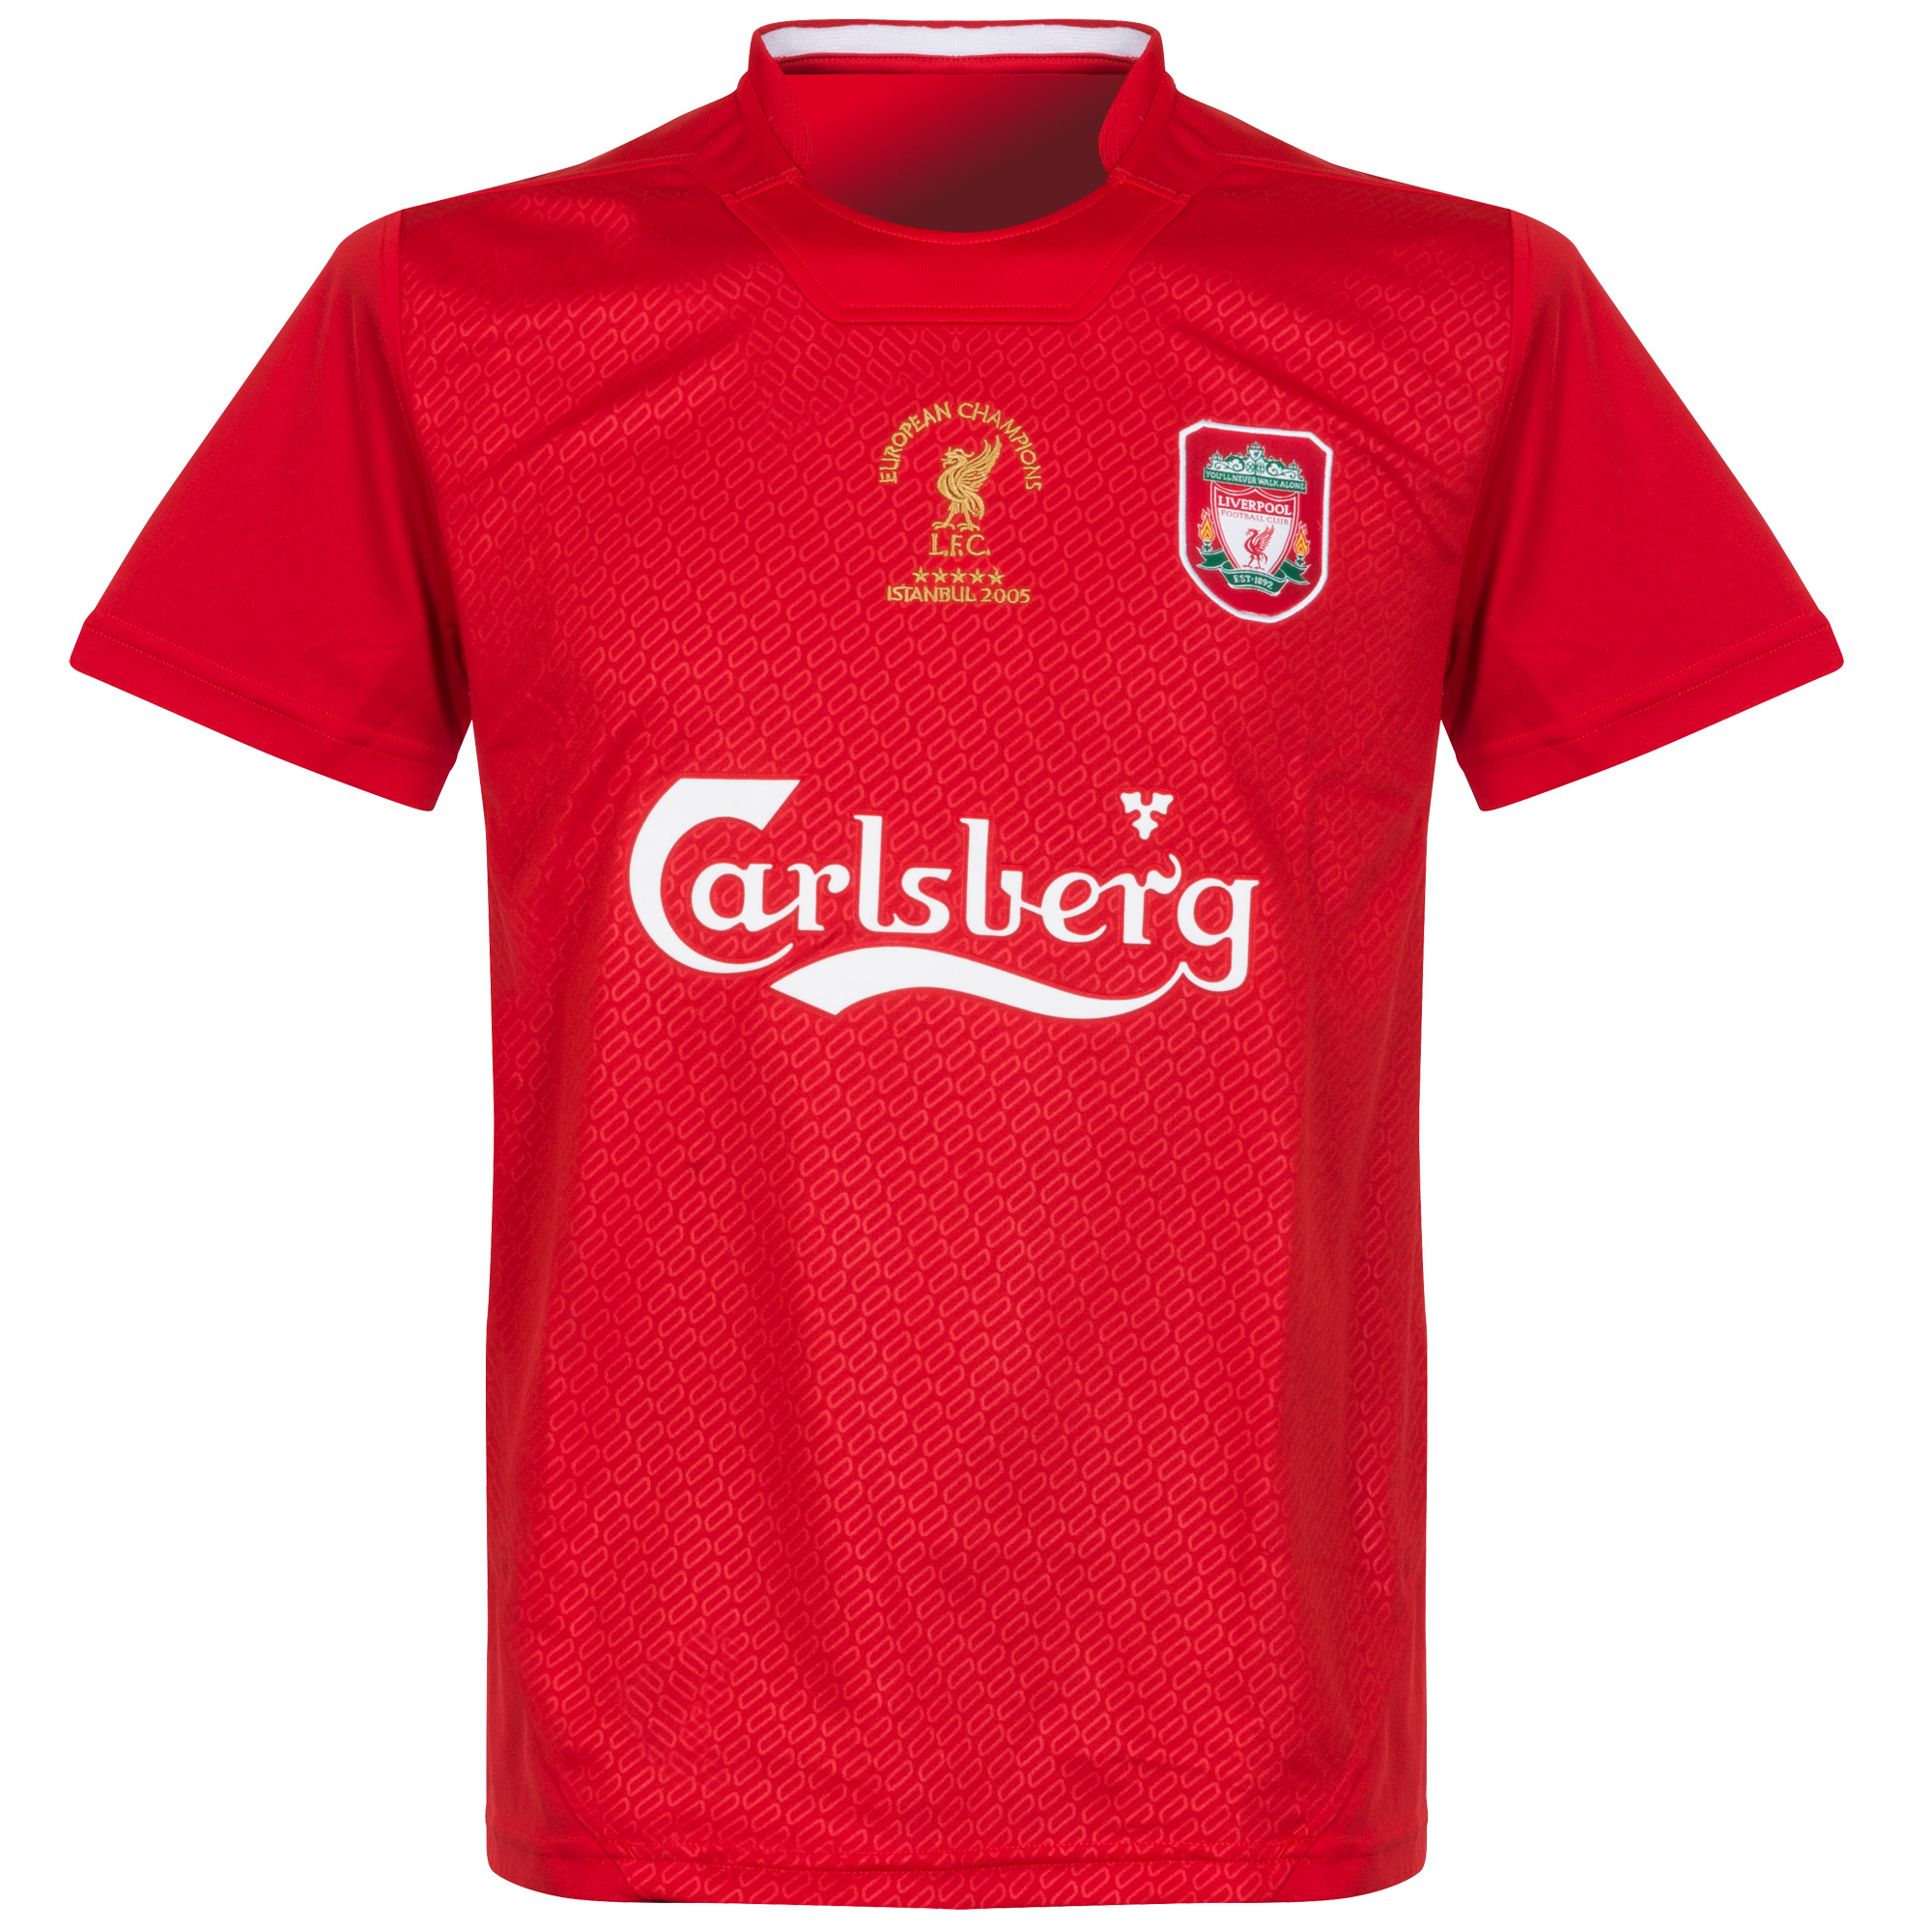 Buy Retro Replica Liverpool old fashioned football shirts and soccer